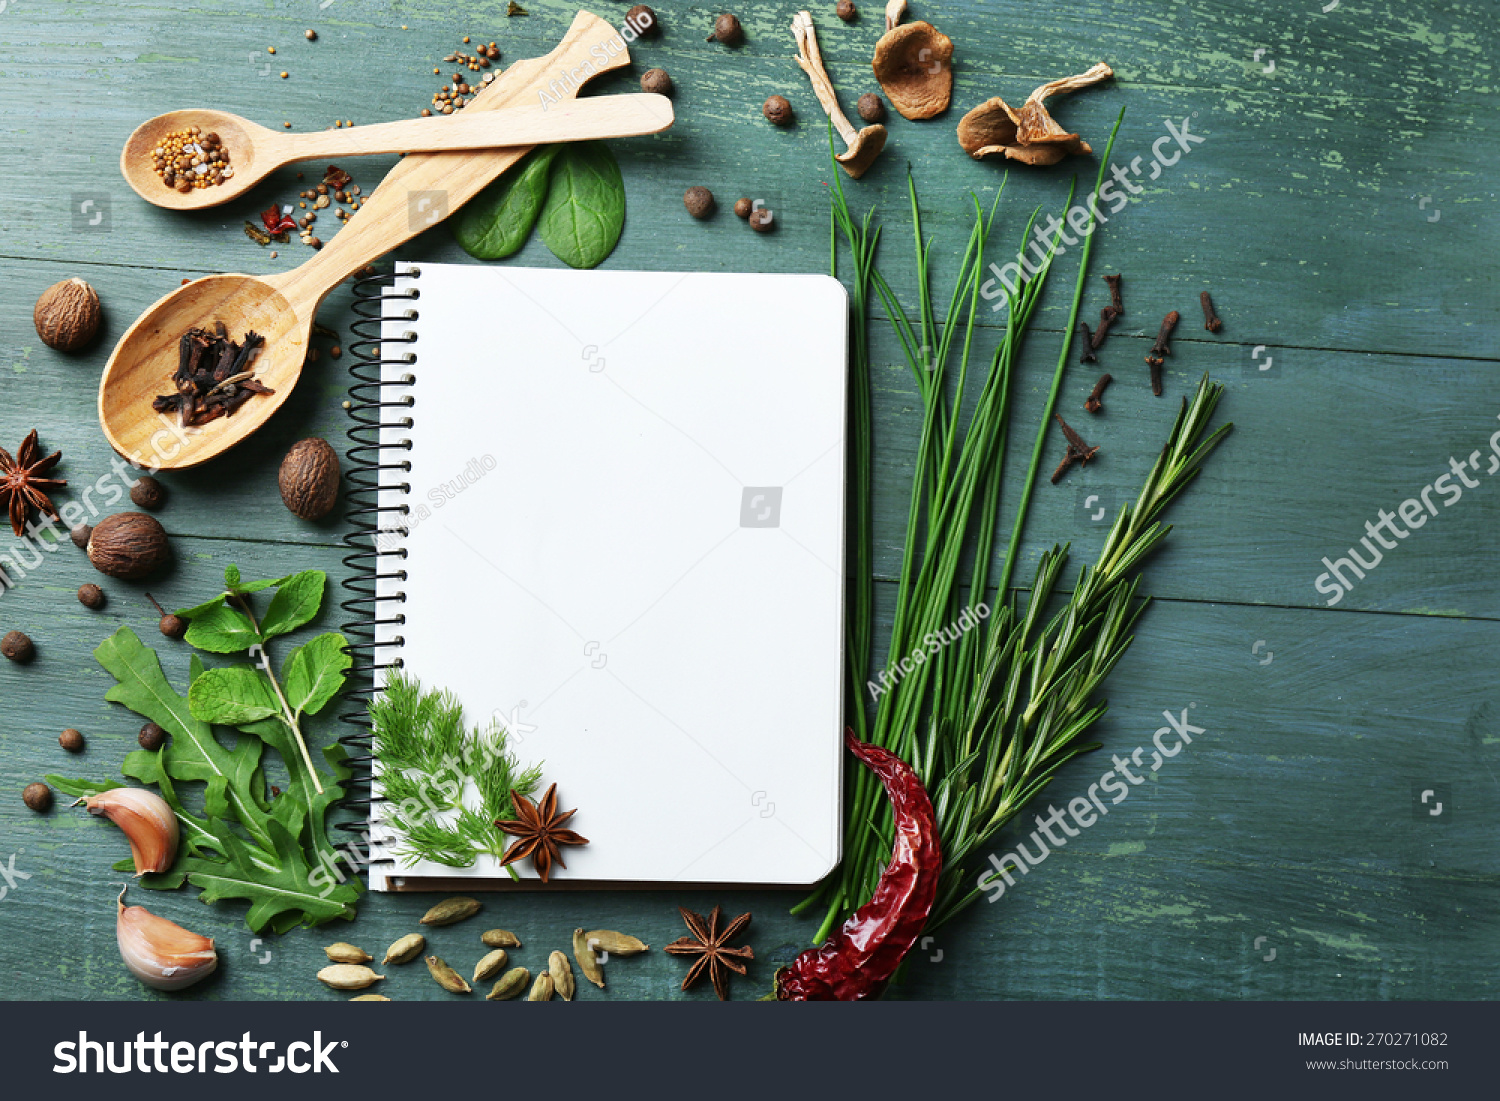 Open recipe book with fresh herbs and spices on wooden background #270271082